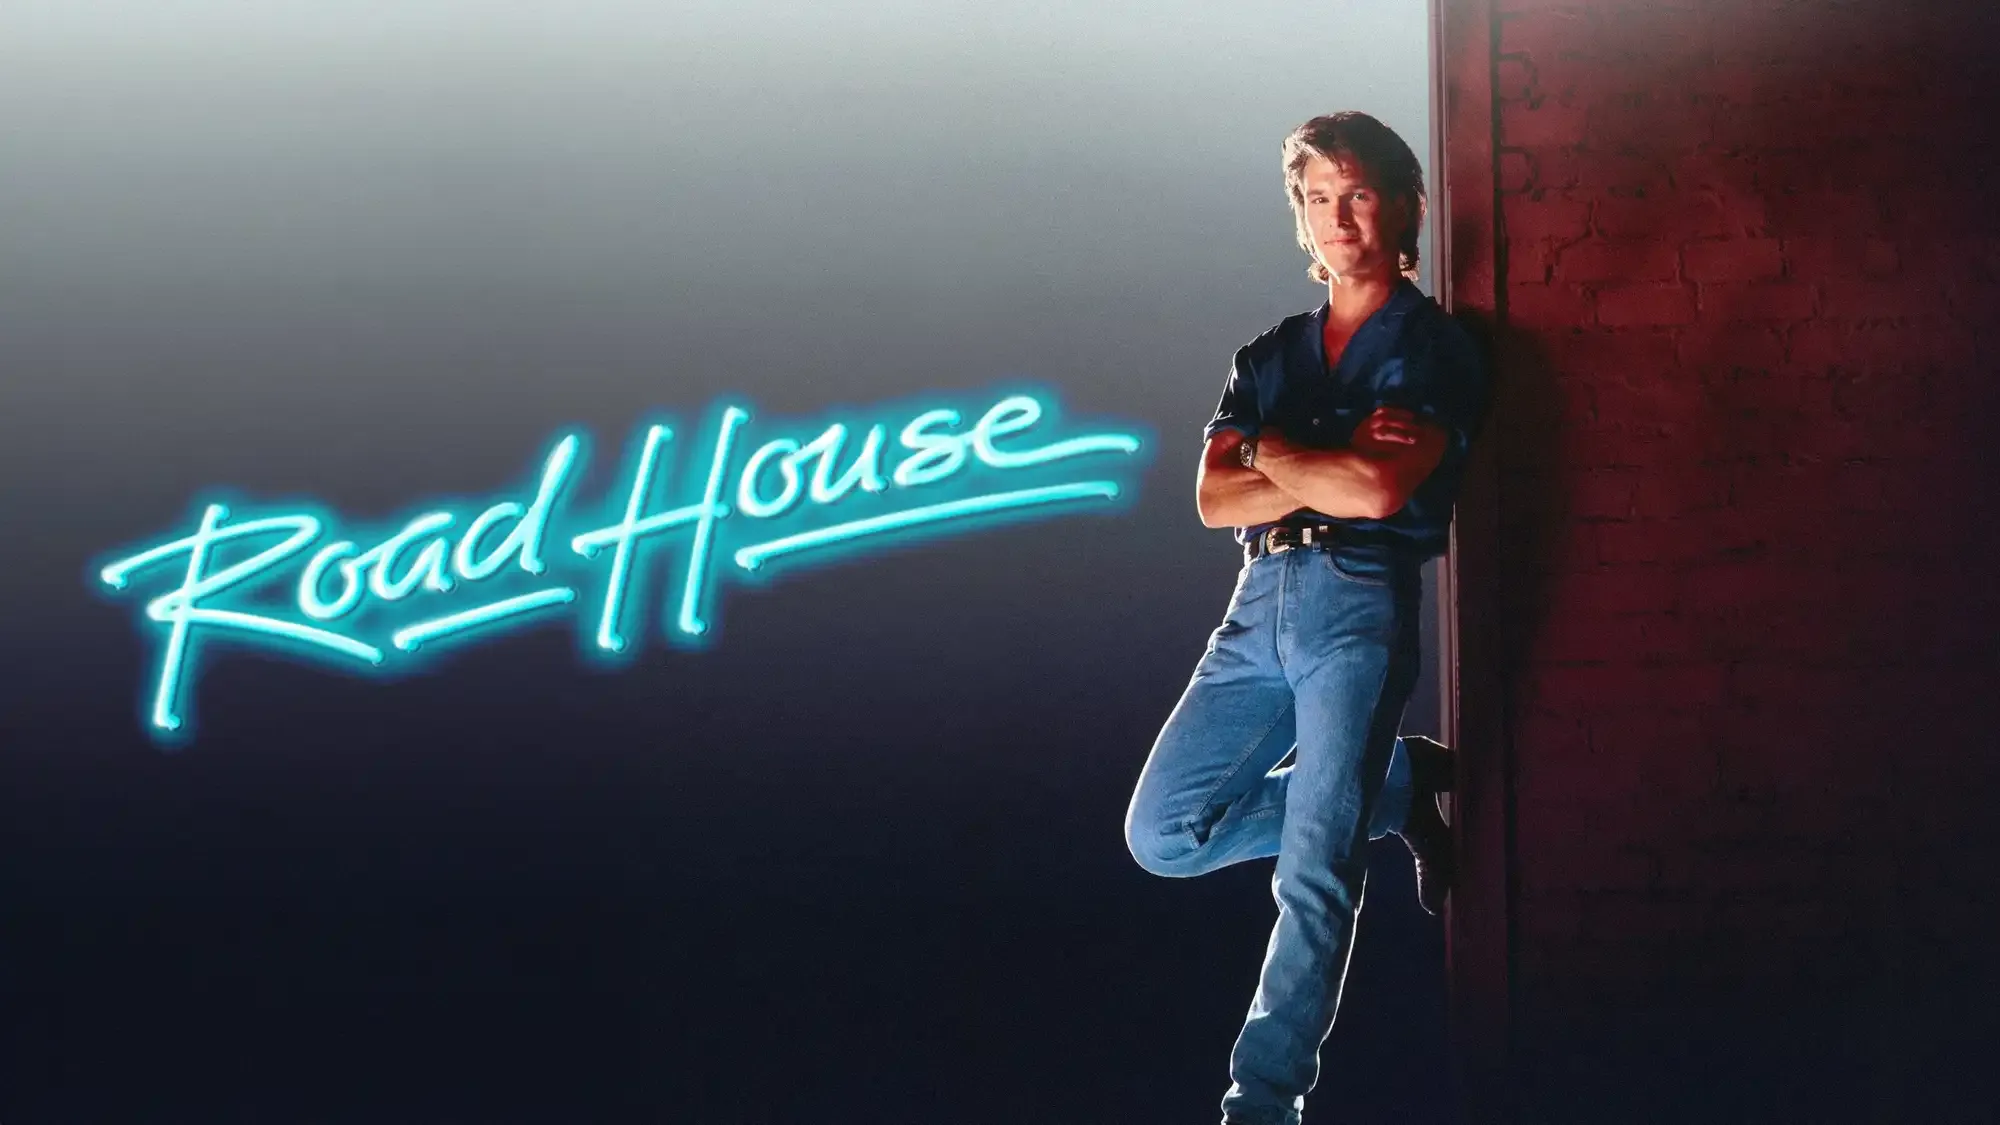 Road House movie review